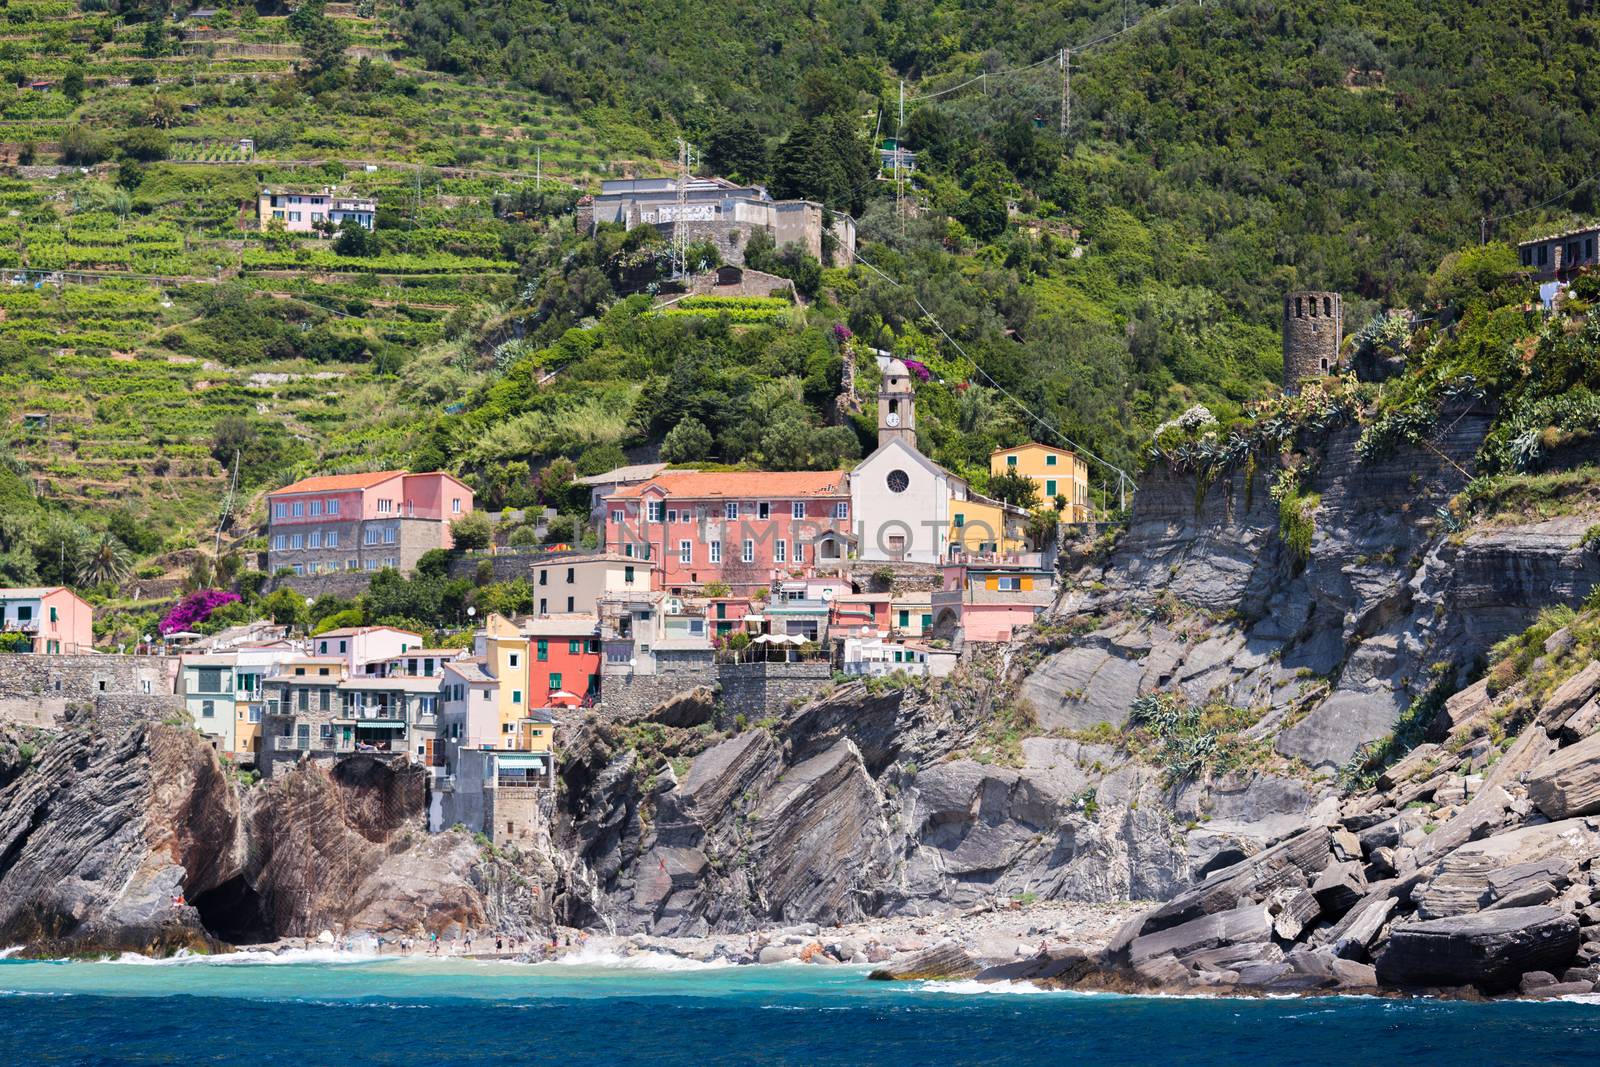 The village of Vernazza of the Cinque Terre by chrisukphoto